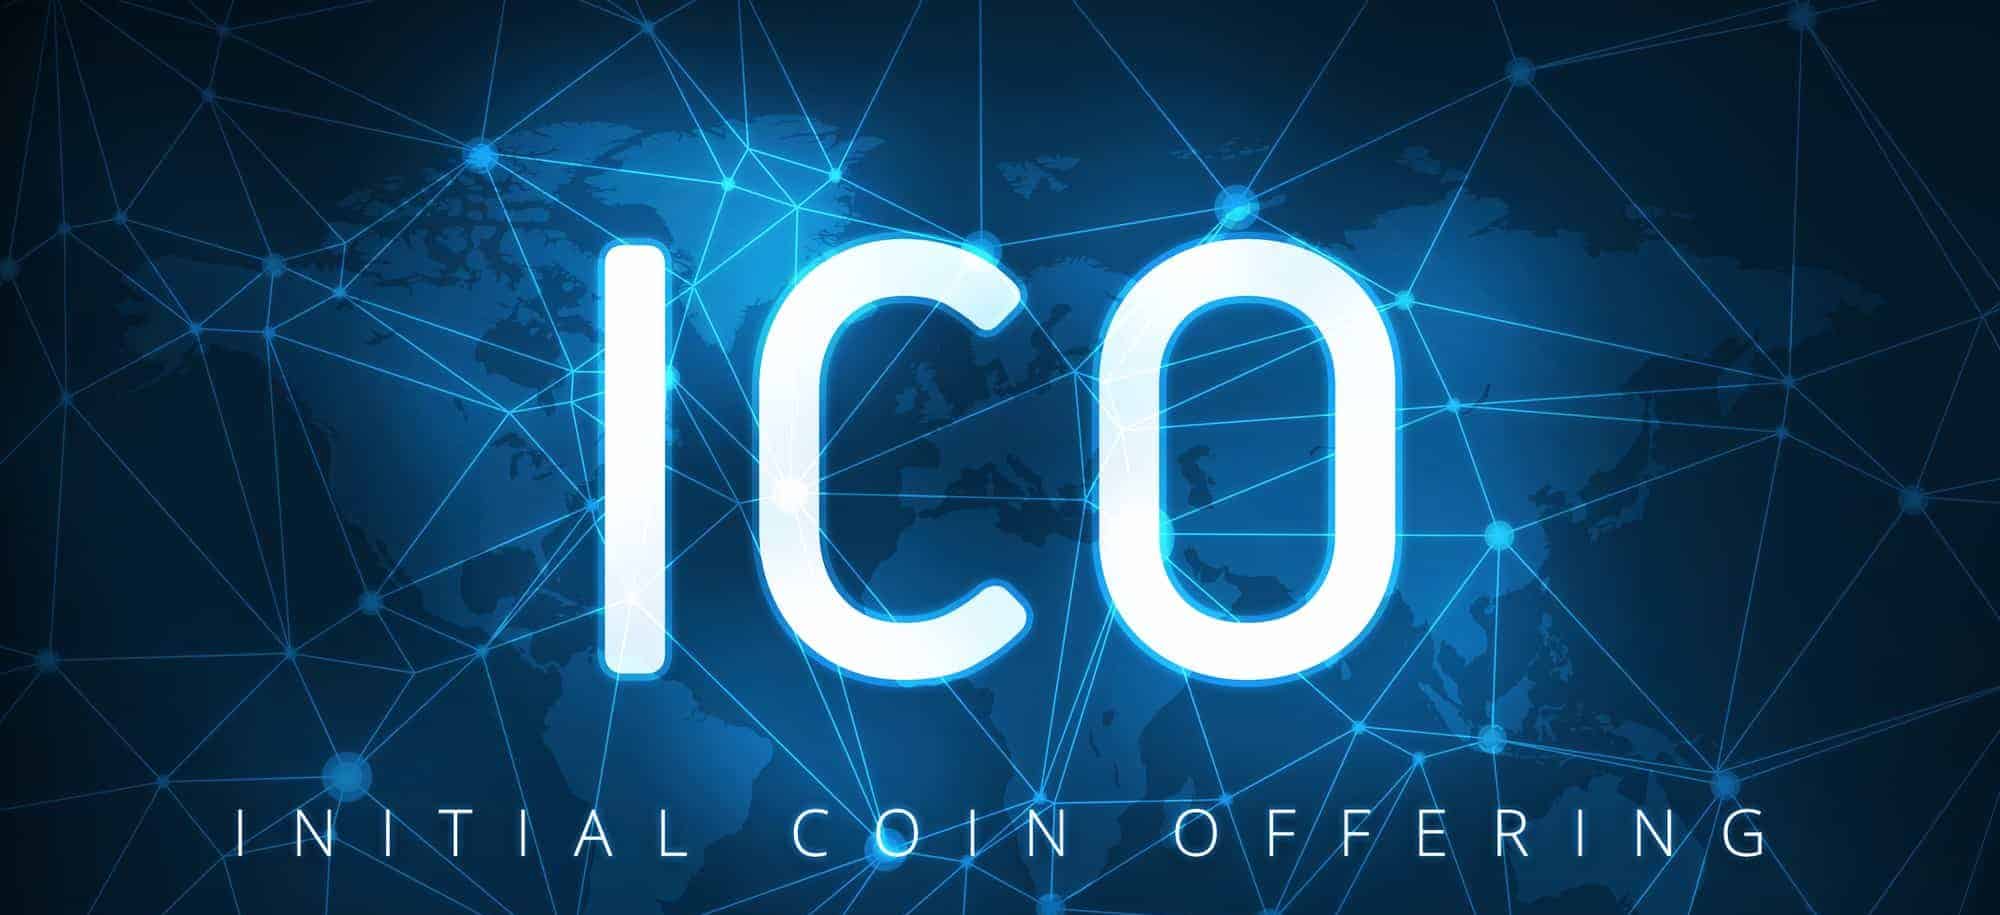 5 Strategies to Successfully Communicate an ICO (Part 1)